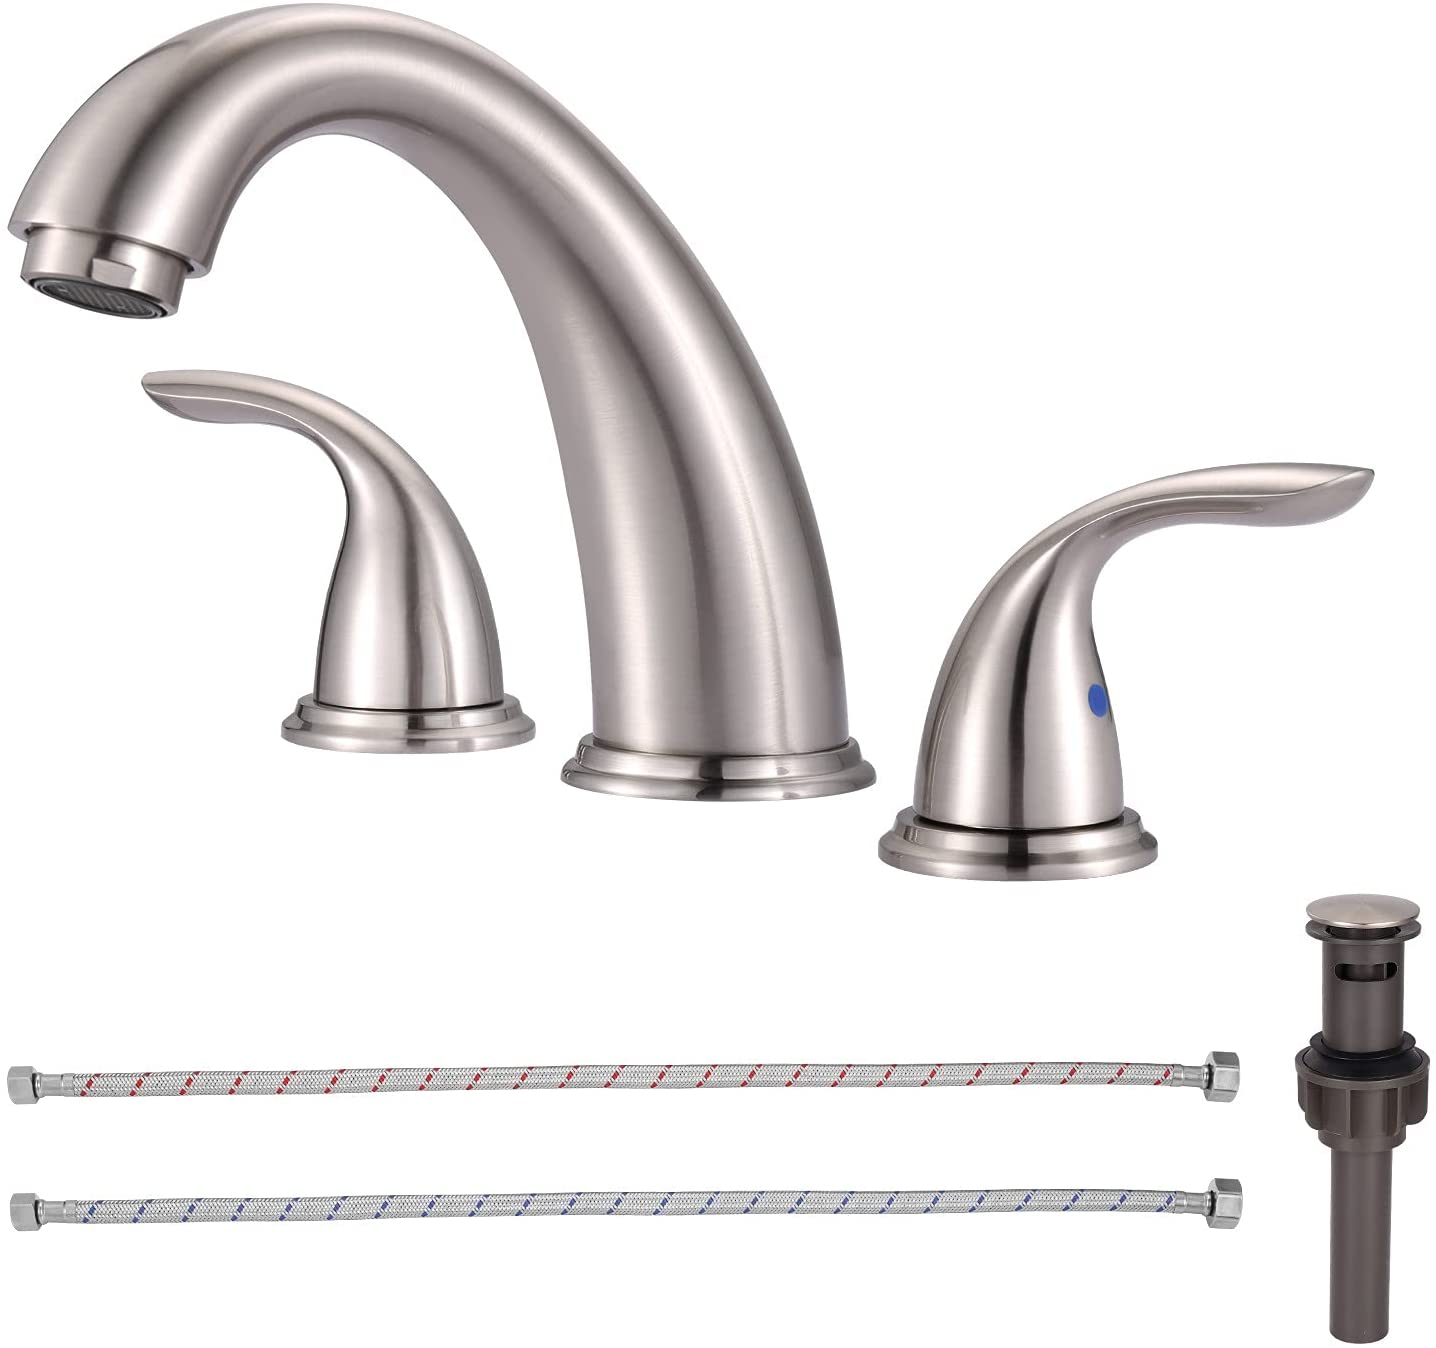 Widespread Bathroom Faucet Brushed Nickel 3 Hole Install,Double Handles Bathroom Faucet with Pop Up Drain and Hot & Cold Water Supply Hoses-Boyel Living